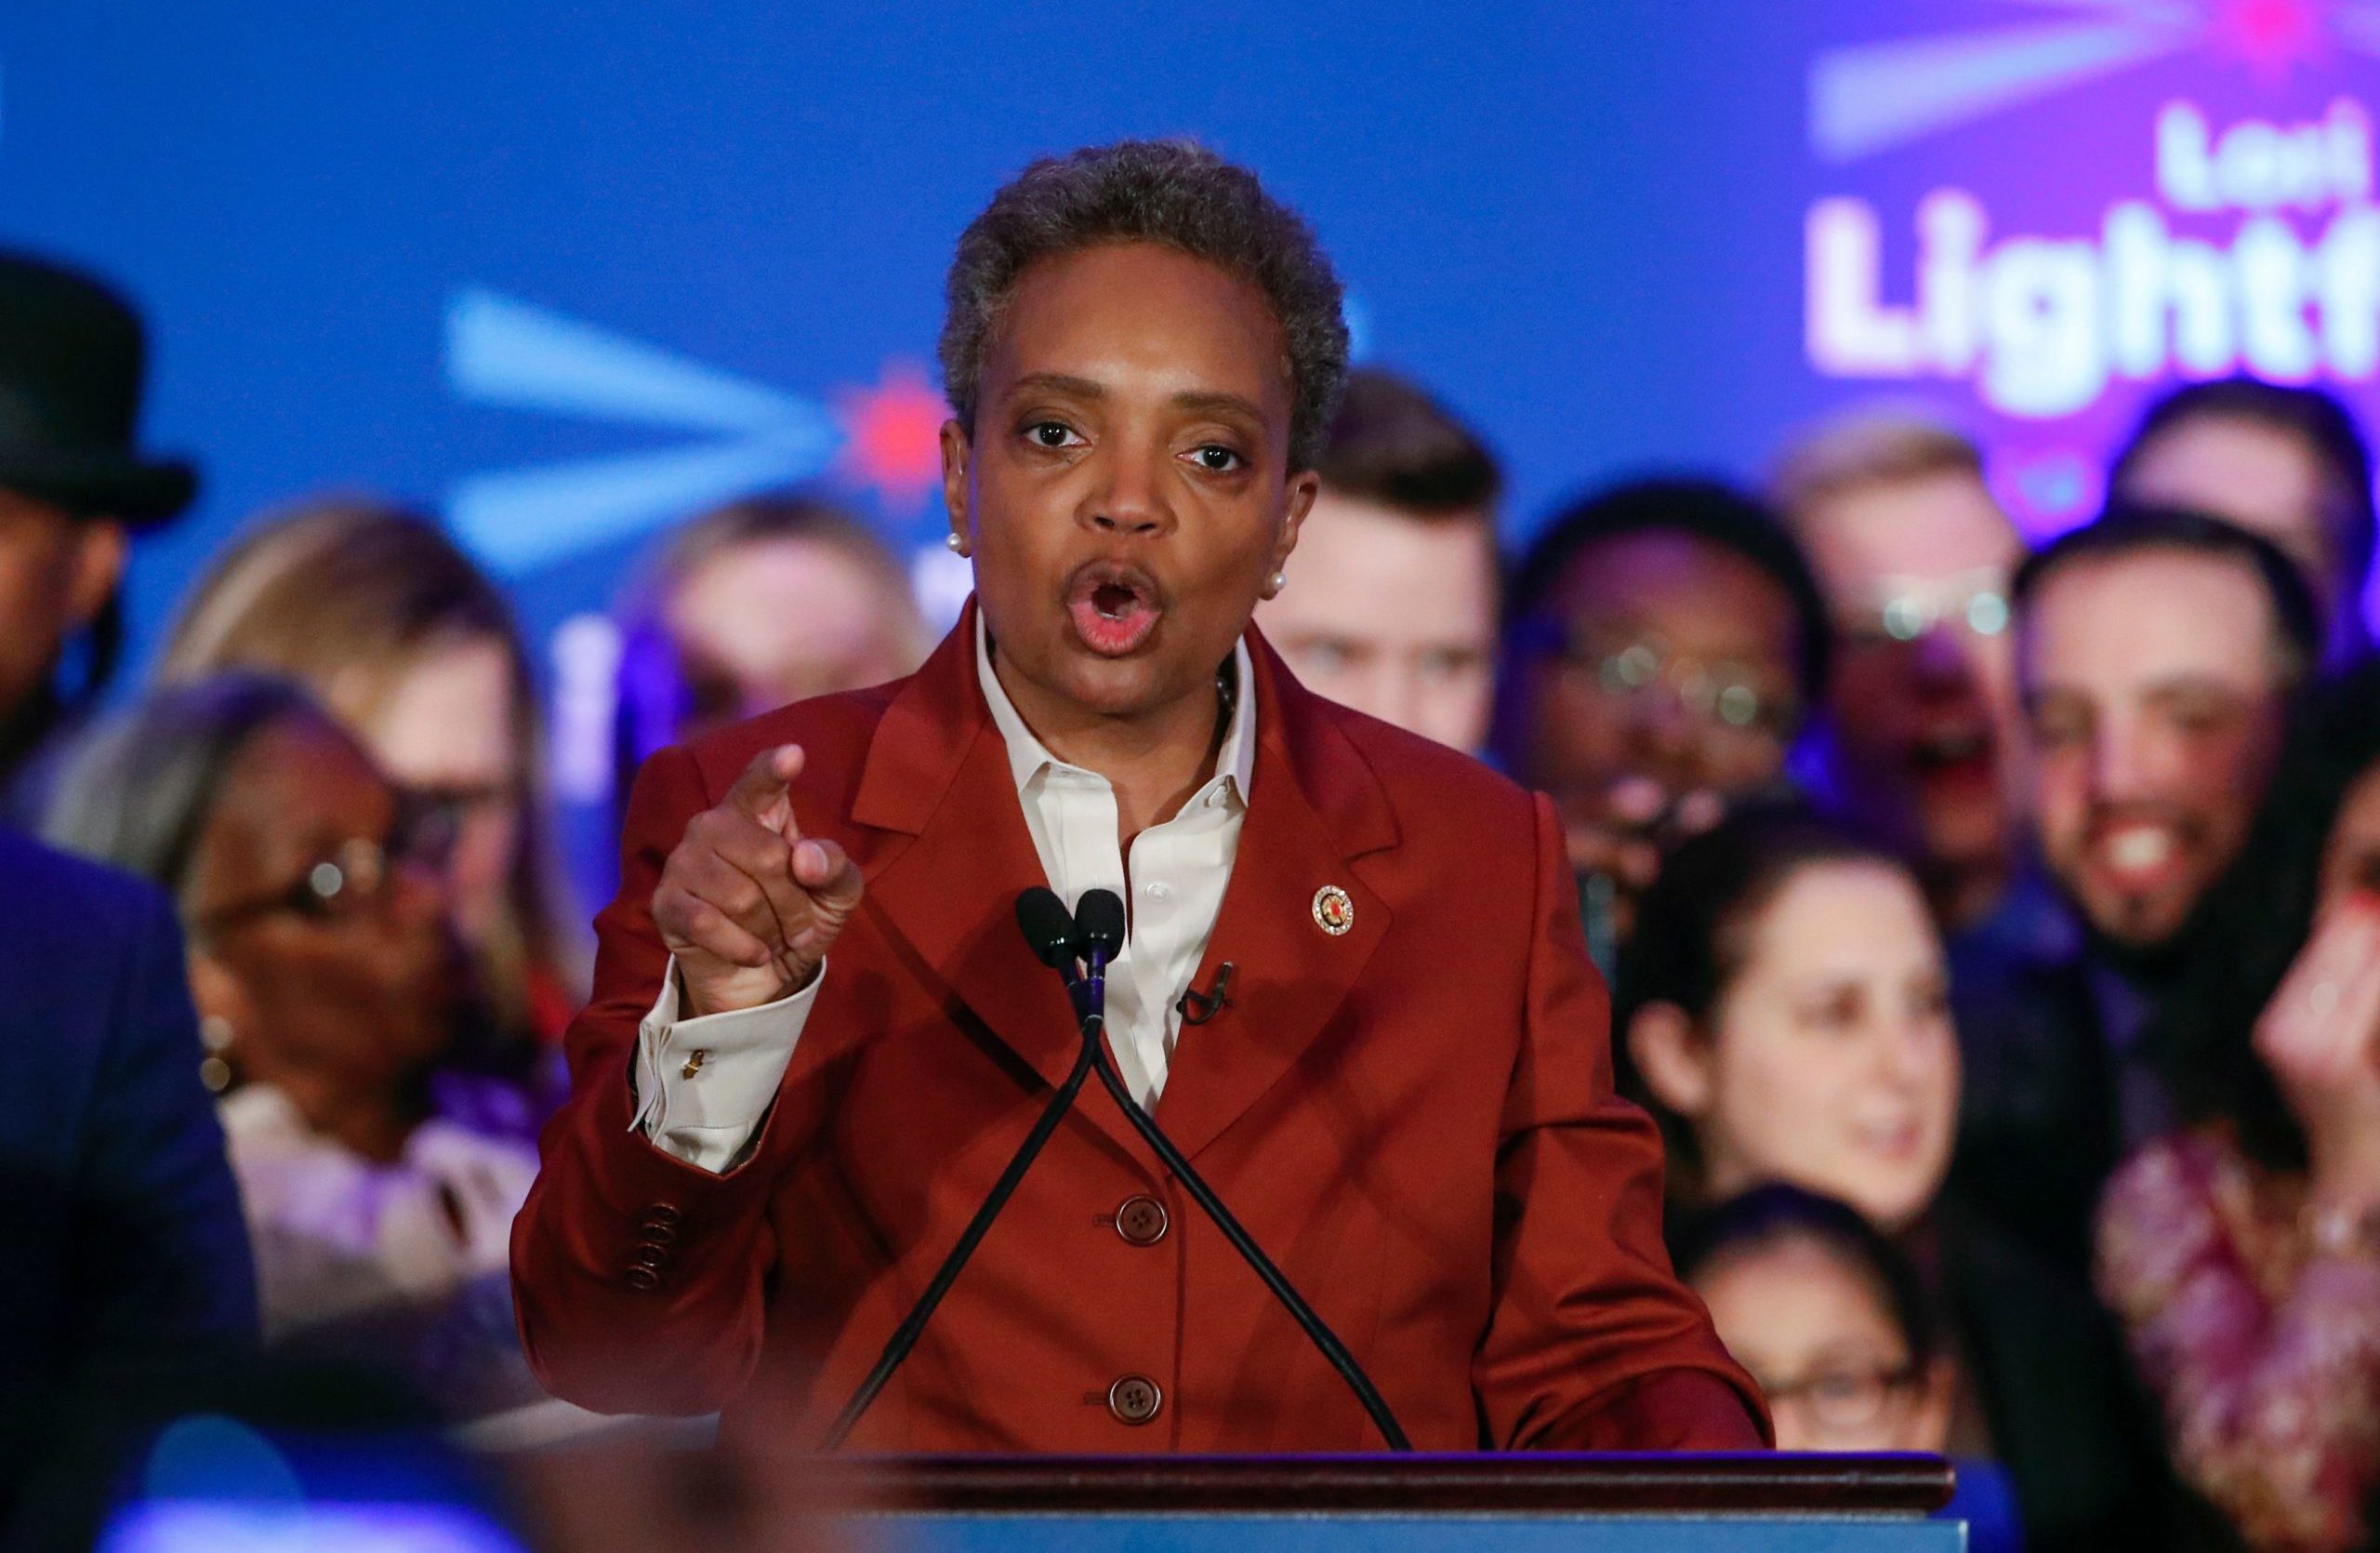 Chicago mayor elect Lori Lightfoot speaks during the election night party in Chicago, Illinois on April 2, 2019. (Photo by Kamil Krzaczynski / AFP)